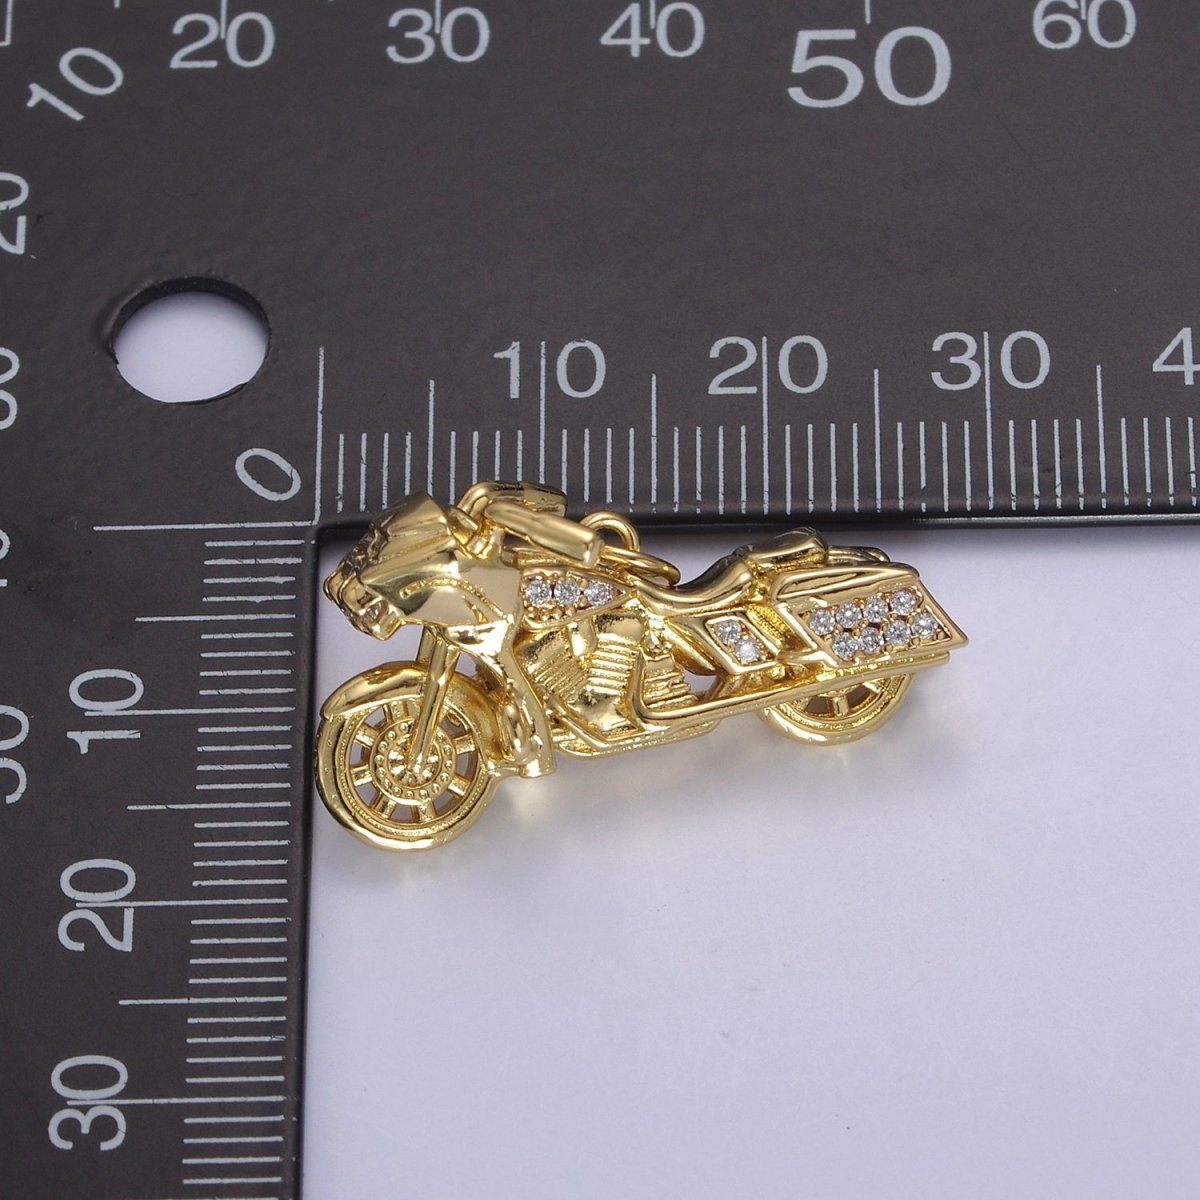 Gold Motorcycle Charm 3D Motorcycle Pendant, Biker Charm, Detailed Motorcycle Pendant N-468 N-625 N-626 - DLUXCA